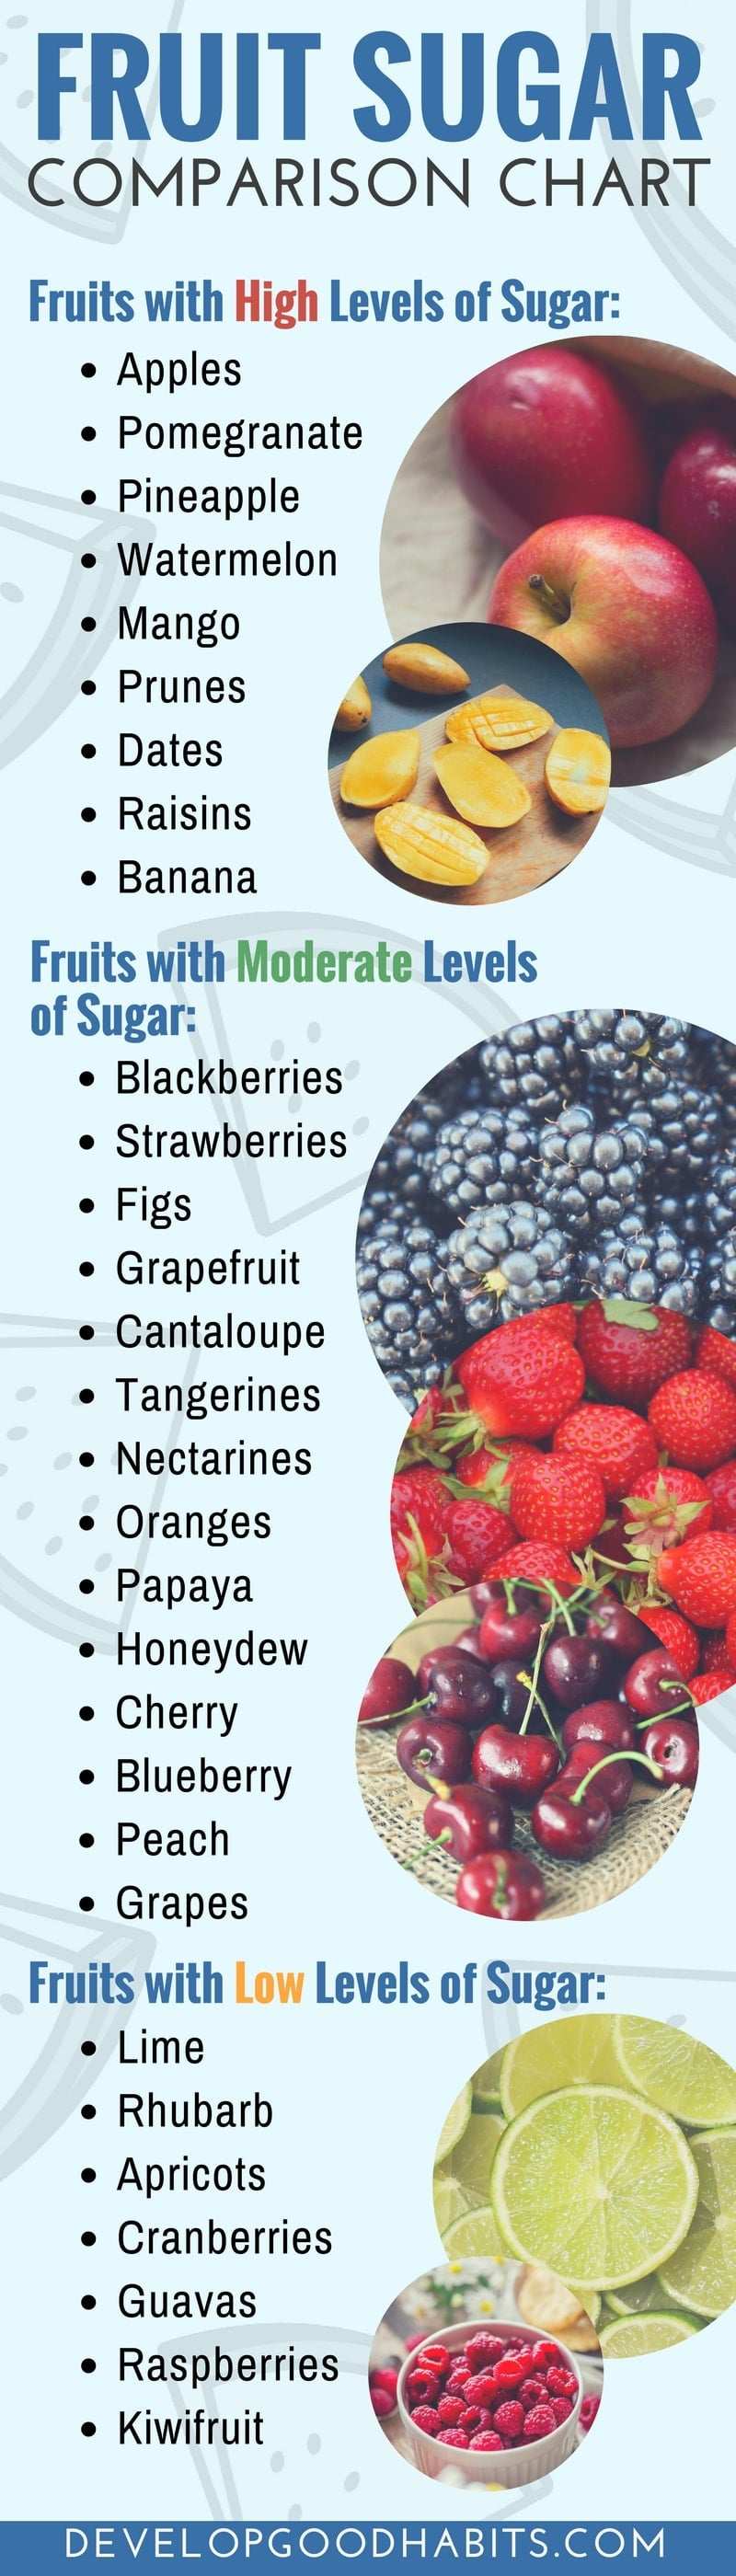 Learn how to quit sugar with the helpf of this Fruit Sugar Comparison Chart. #infographic #healthyliving #longevity #healthyeating #healthylifestyle #lifespan #healthyhabits #healthylife